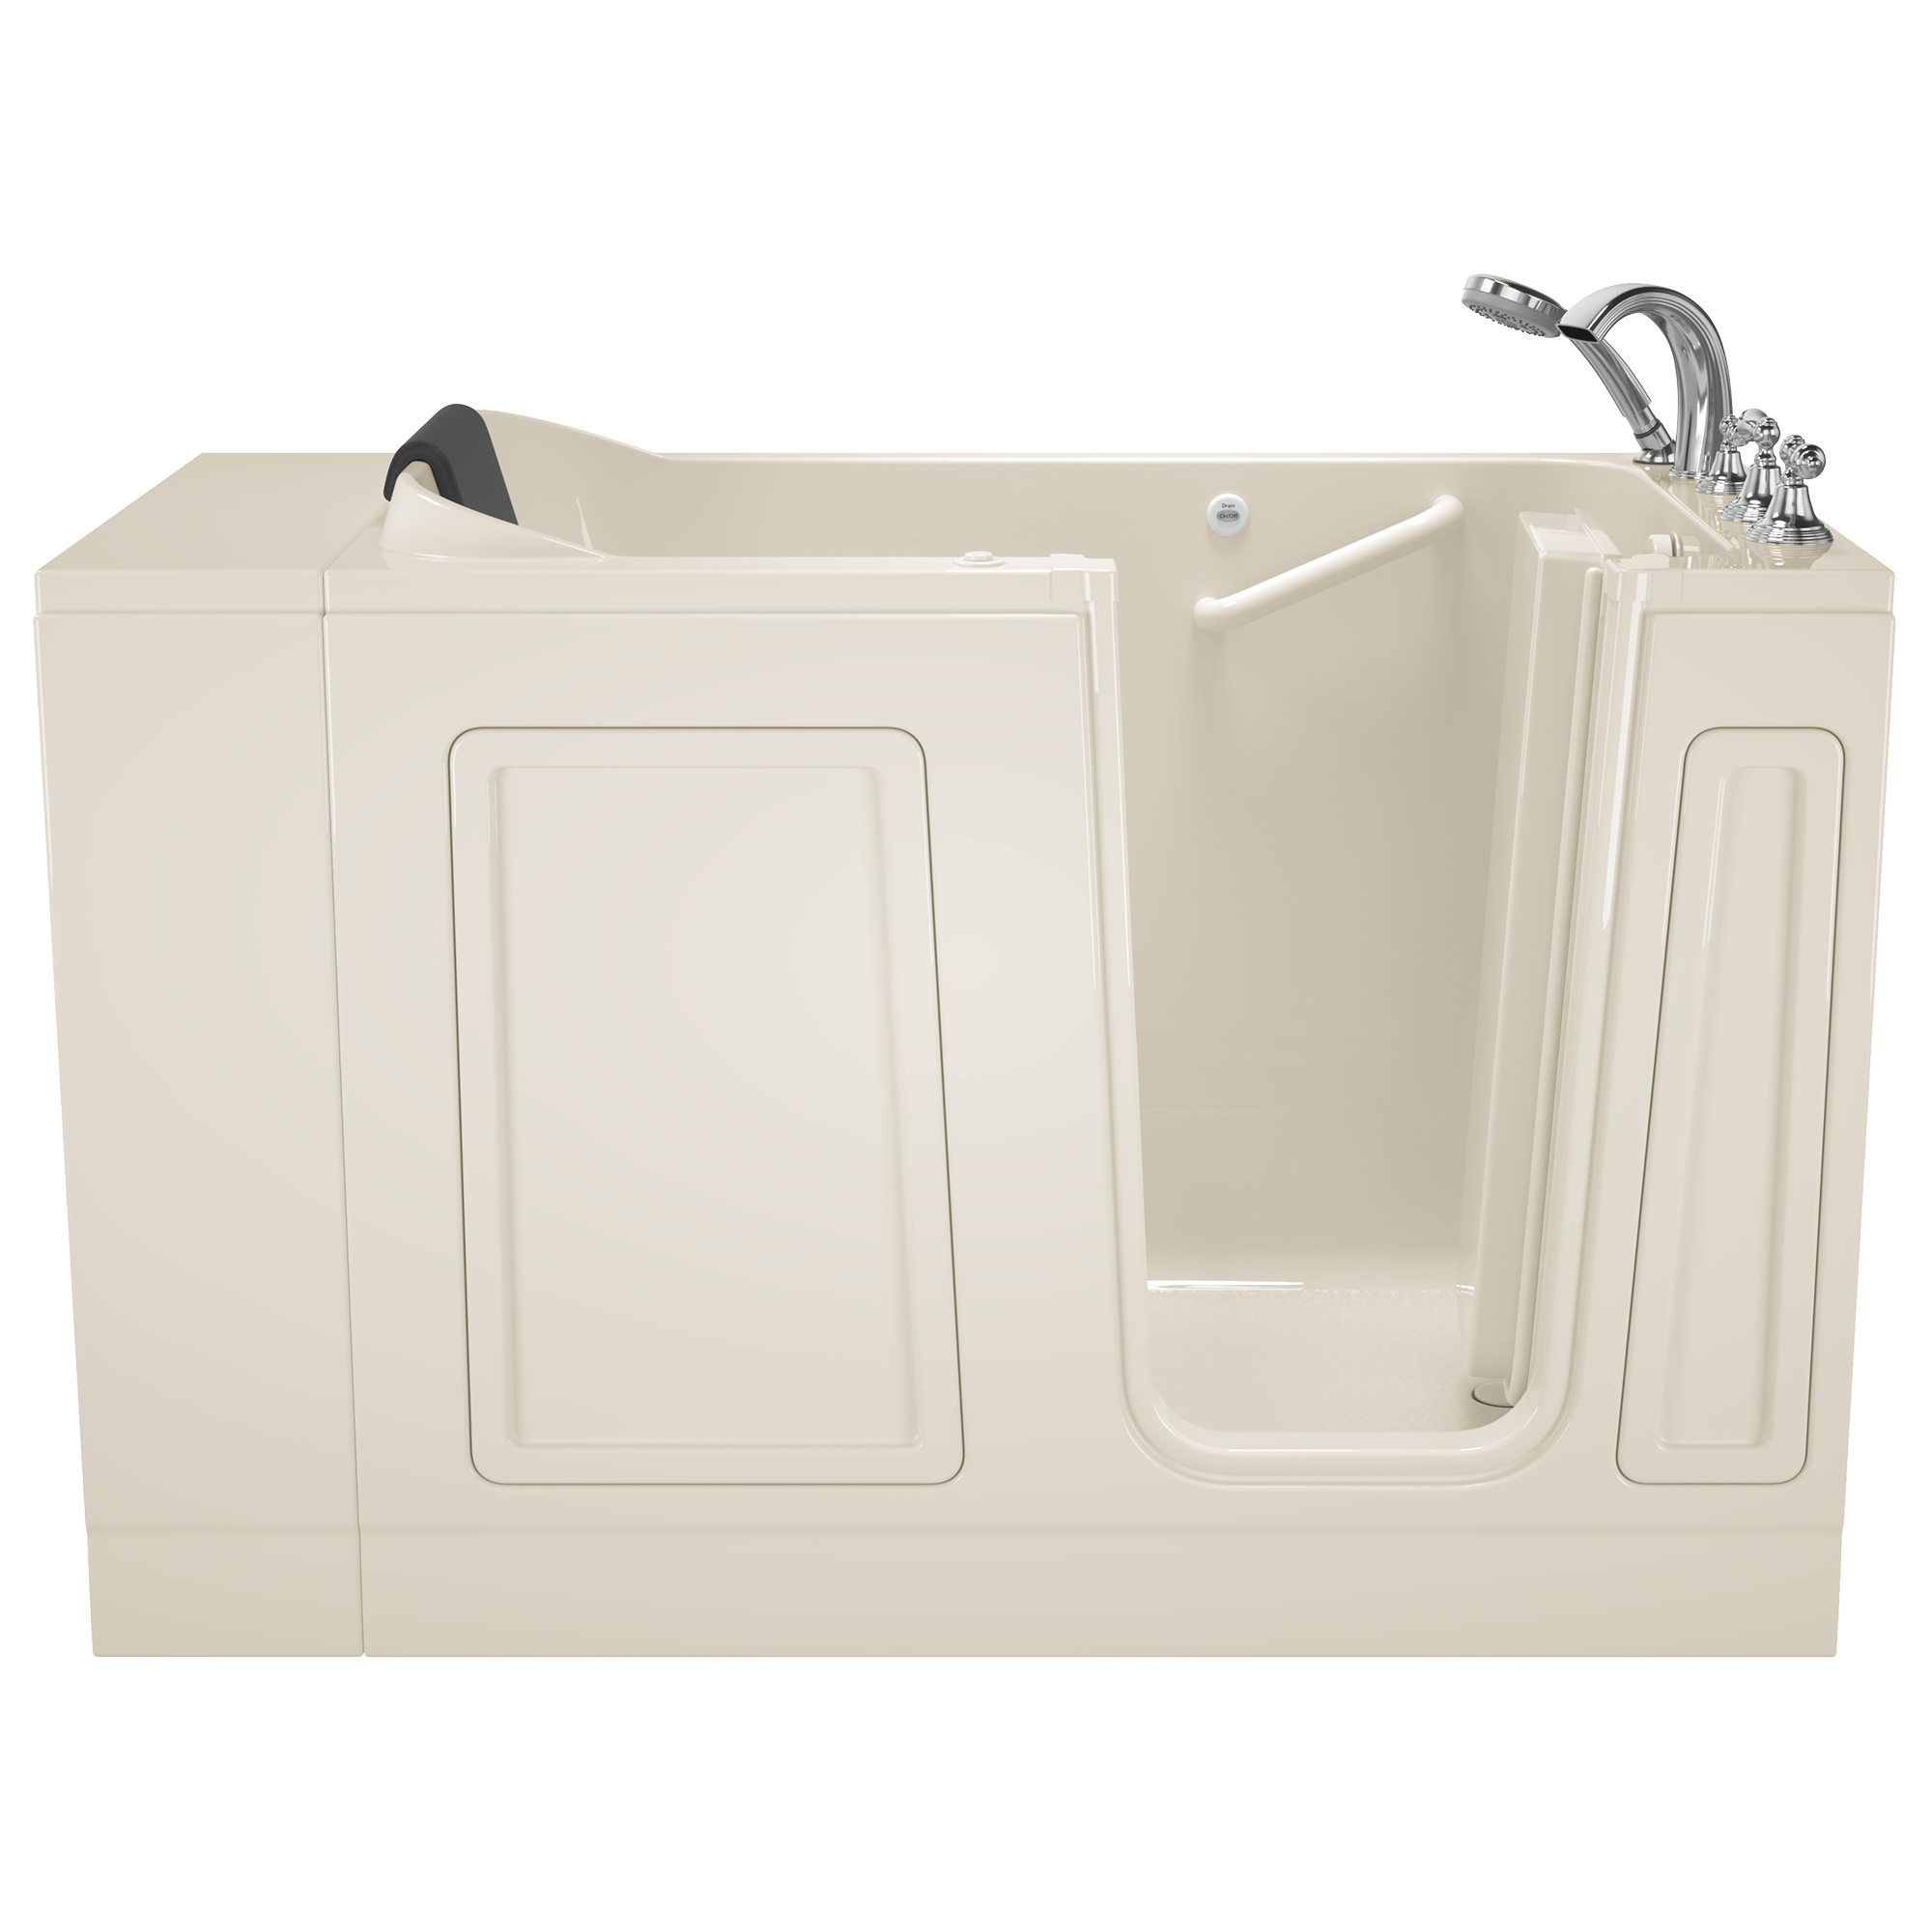 Acrylic Luxury Series 30 x 51 -Inch Walk-in Tub With Air Spa System - Right-Hand Drain With Faucet